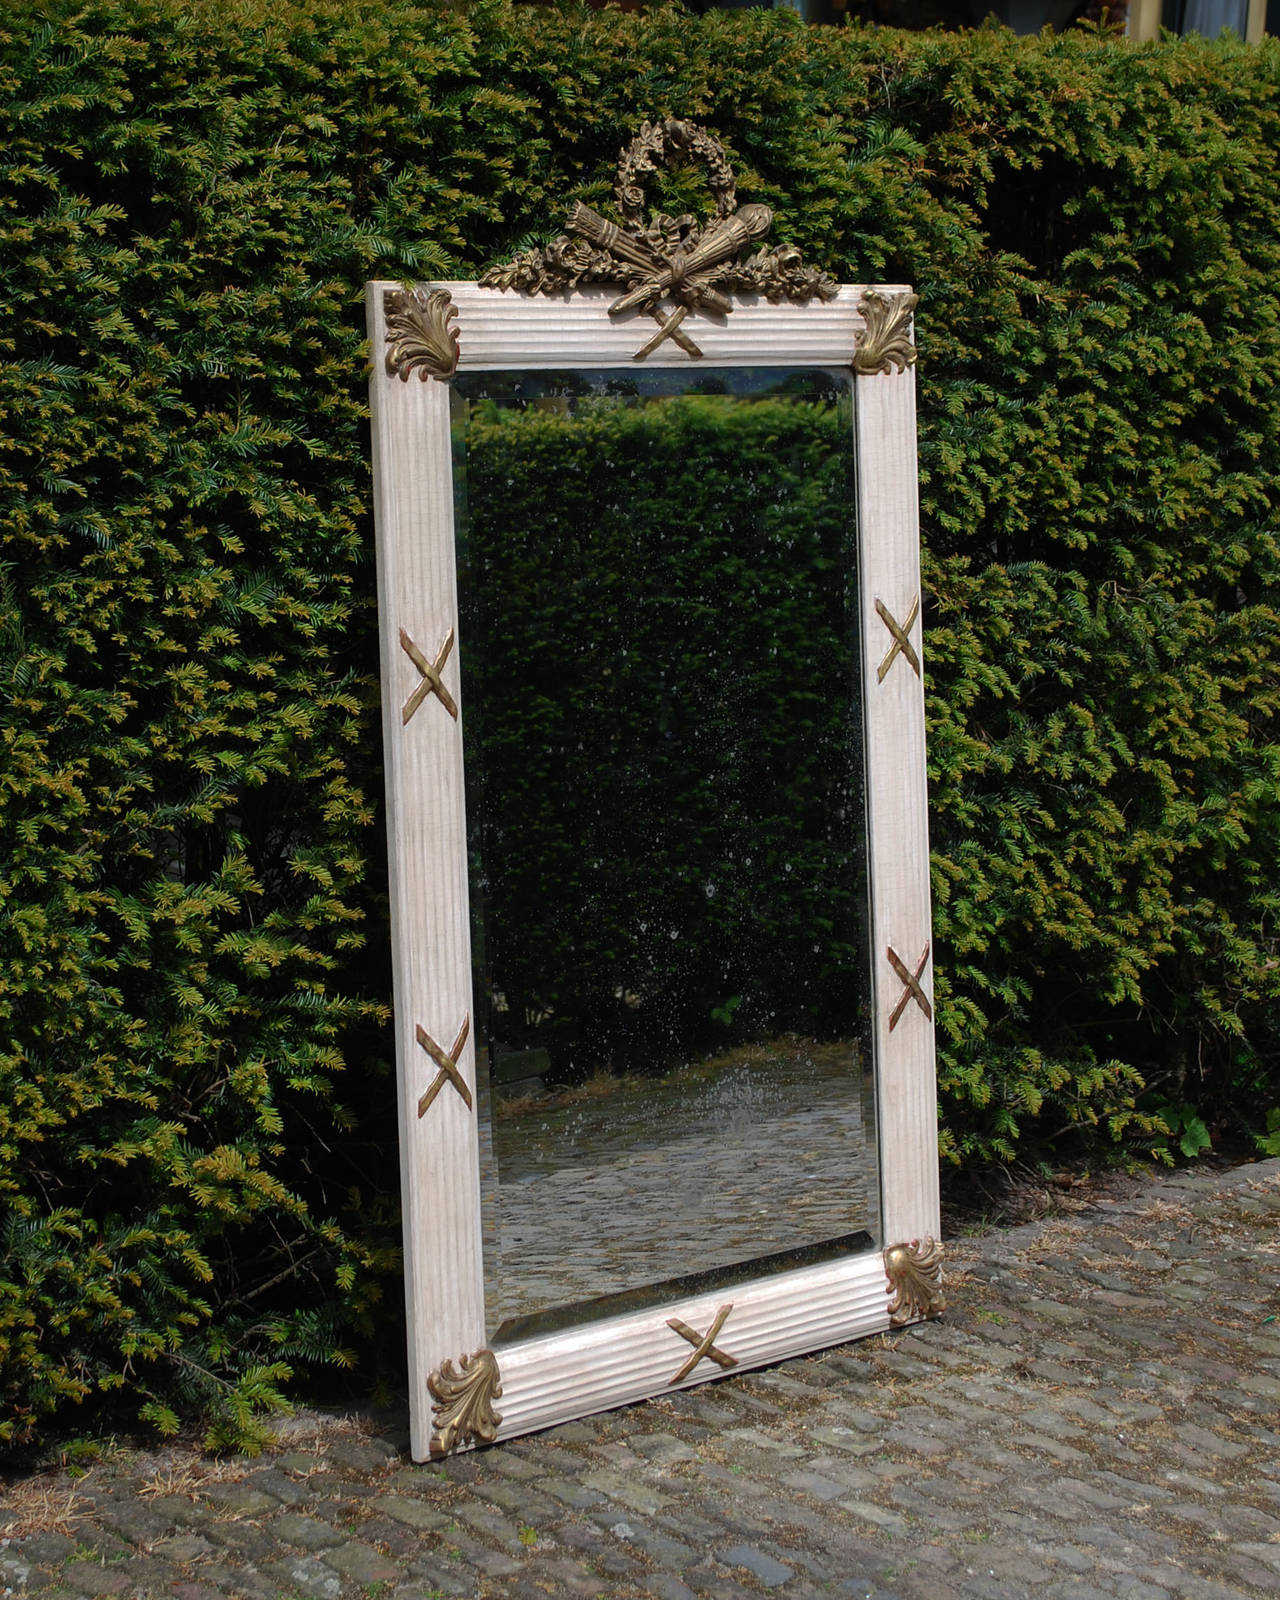 20th century French mirror.
Original glass.
Off-white color with gold gilded top and accents.
Originates France, dating circa 1910.